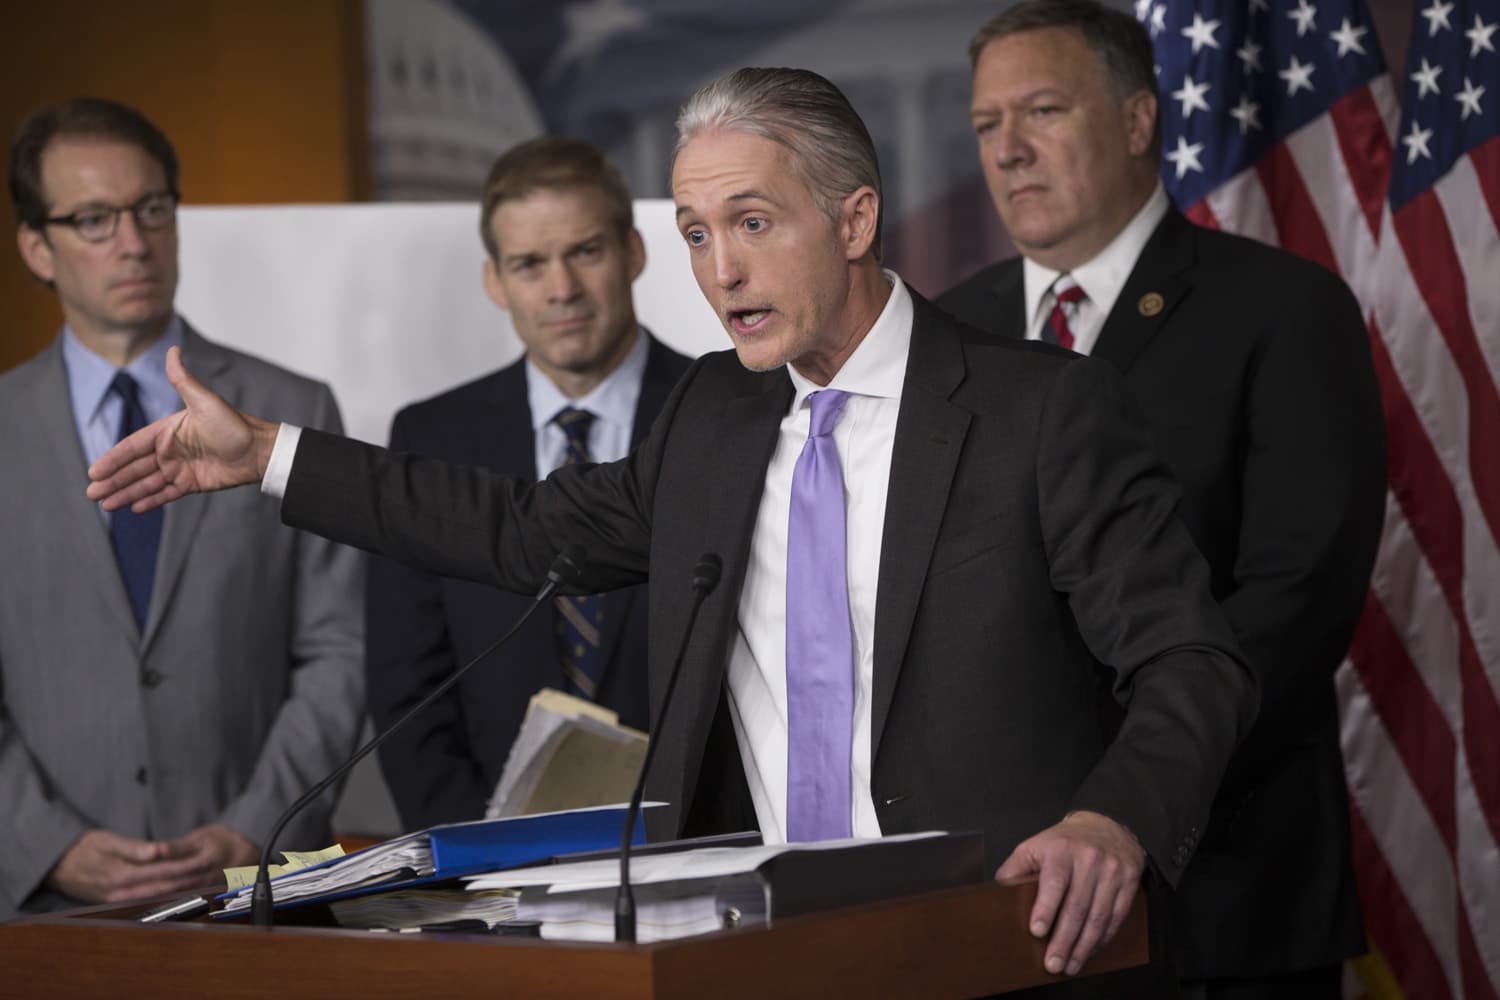 House Benghazi Committee Chairman Rep. Trey Gowdy, R-S.C., second from right, joined by other Republican members of the panel, discusses the release of his final report on the 2012 attacks on the U.S. consulate in Benghazi, Libya (J. Scott Applewhite/AP)